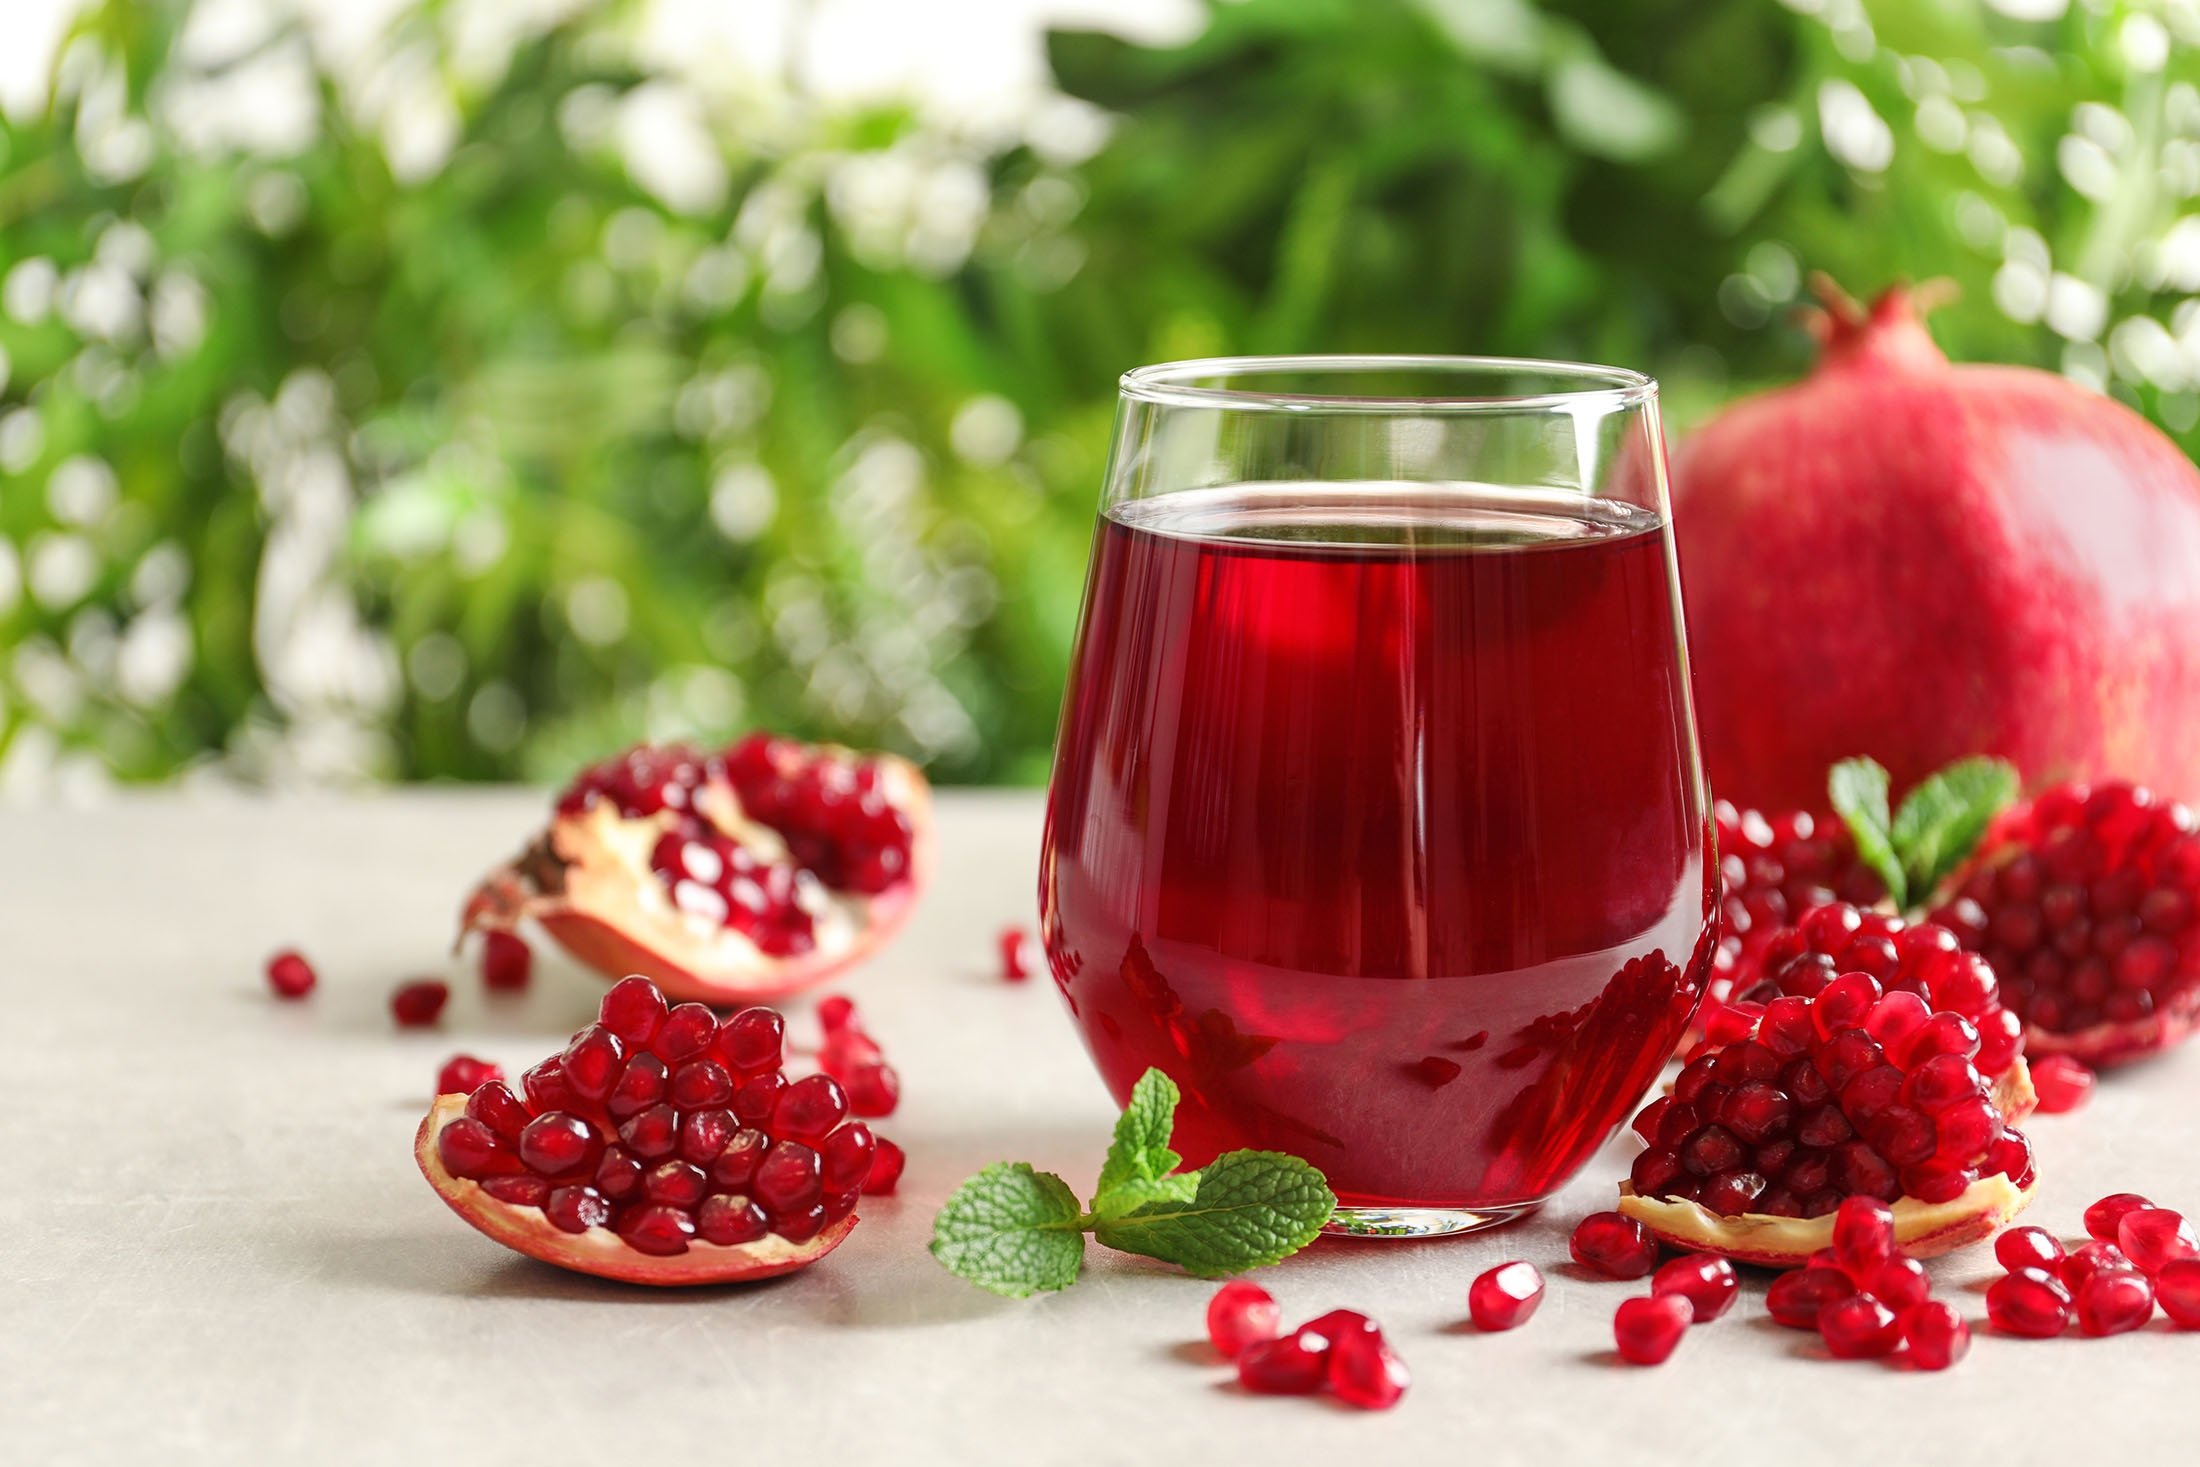 Pomegranate sorbet is known to balance blood sugar level and blood pressure.  (Photo by Shutterstock)